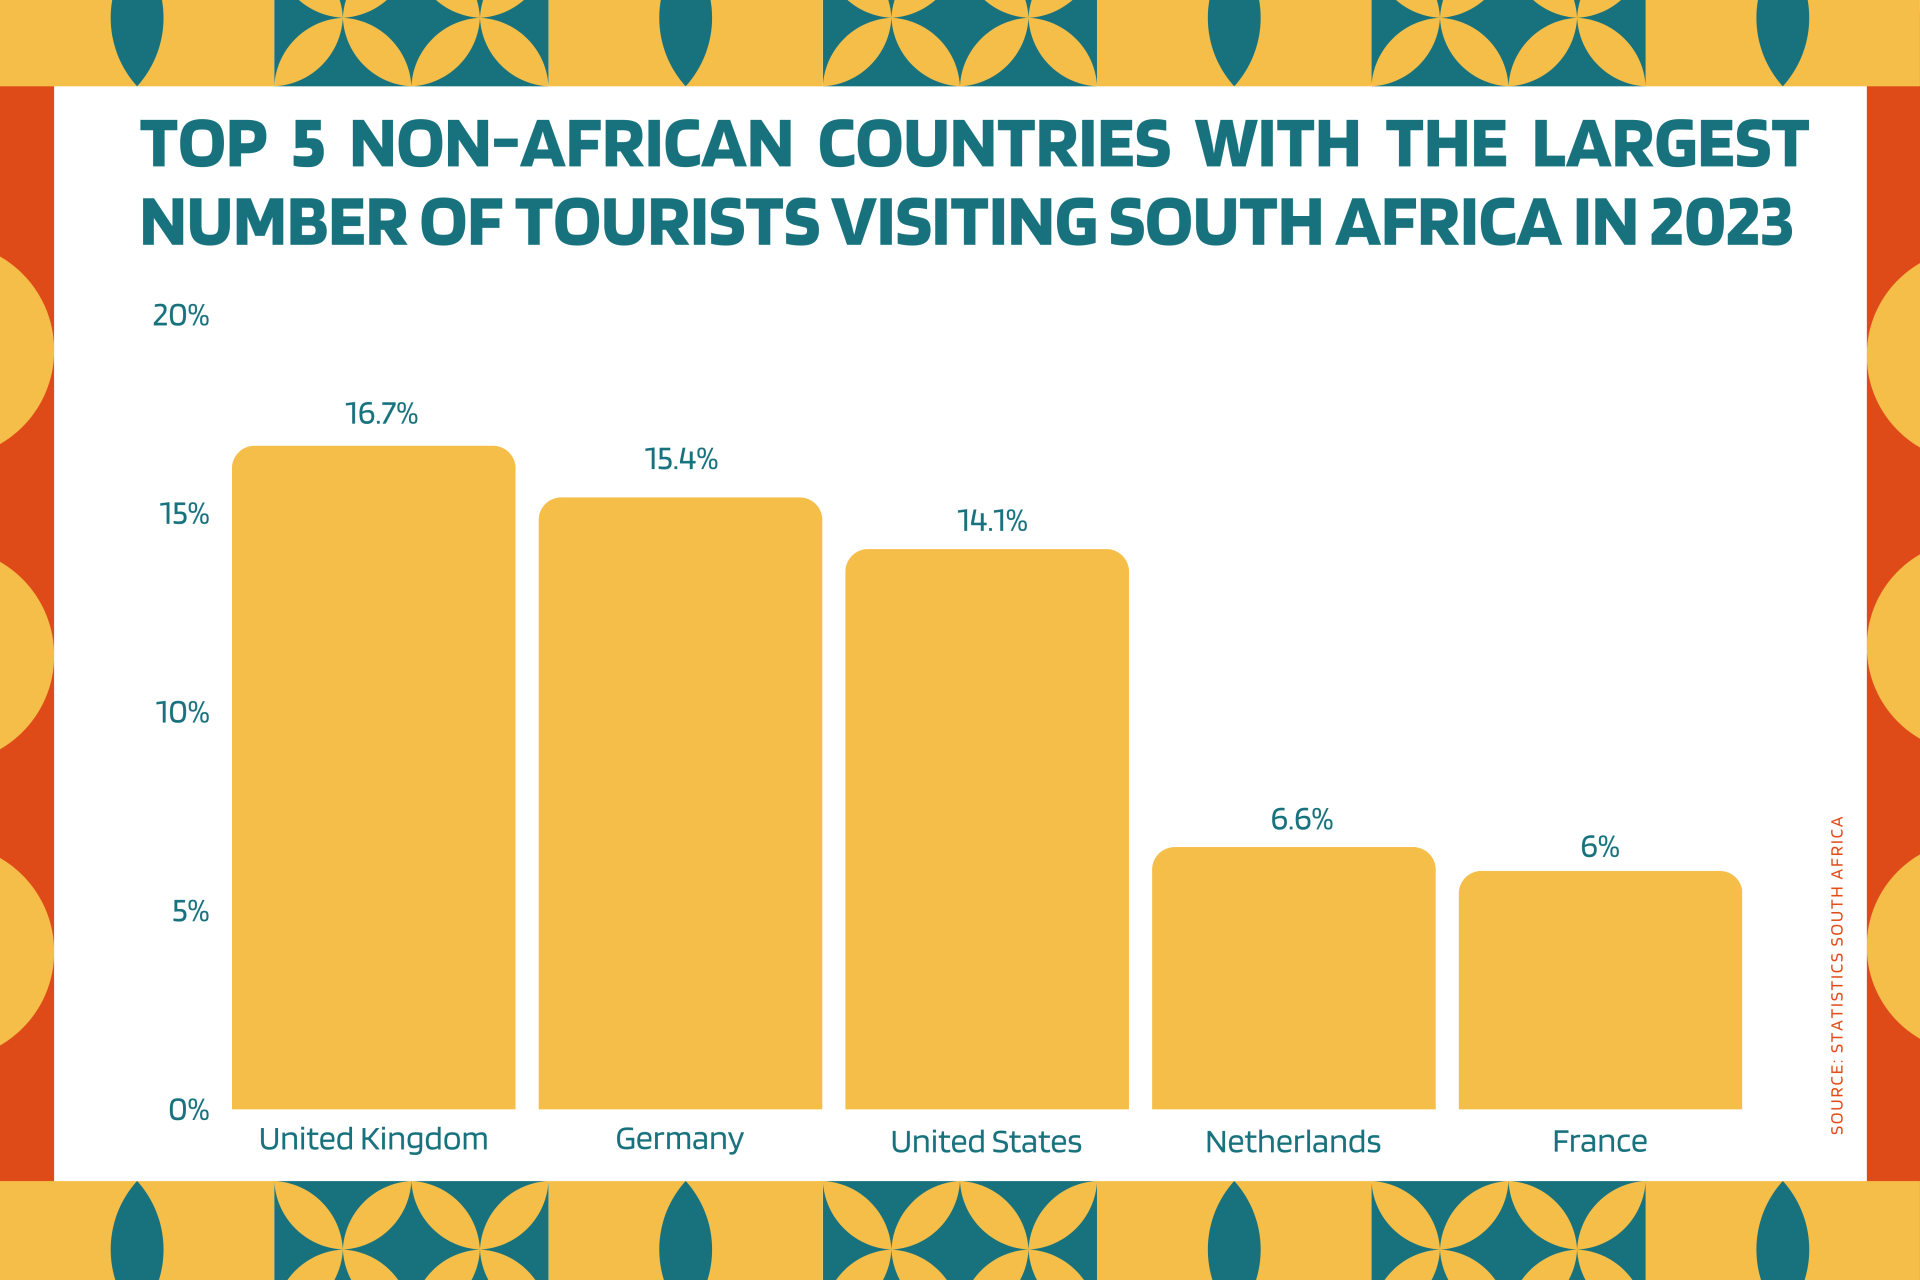 South Africa Was Visited by Almost 8 million International Tourists in 2023!